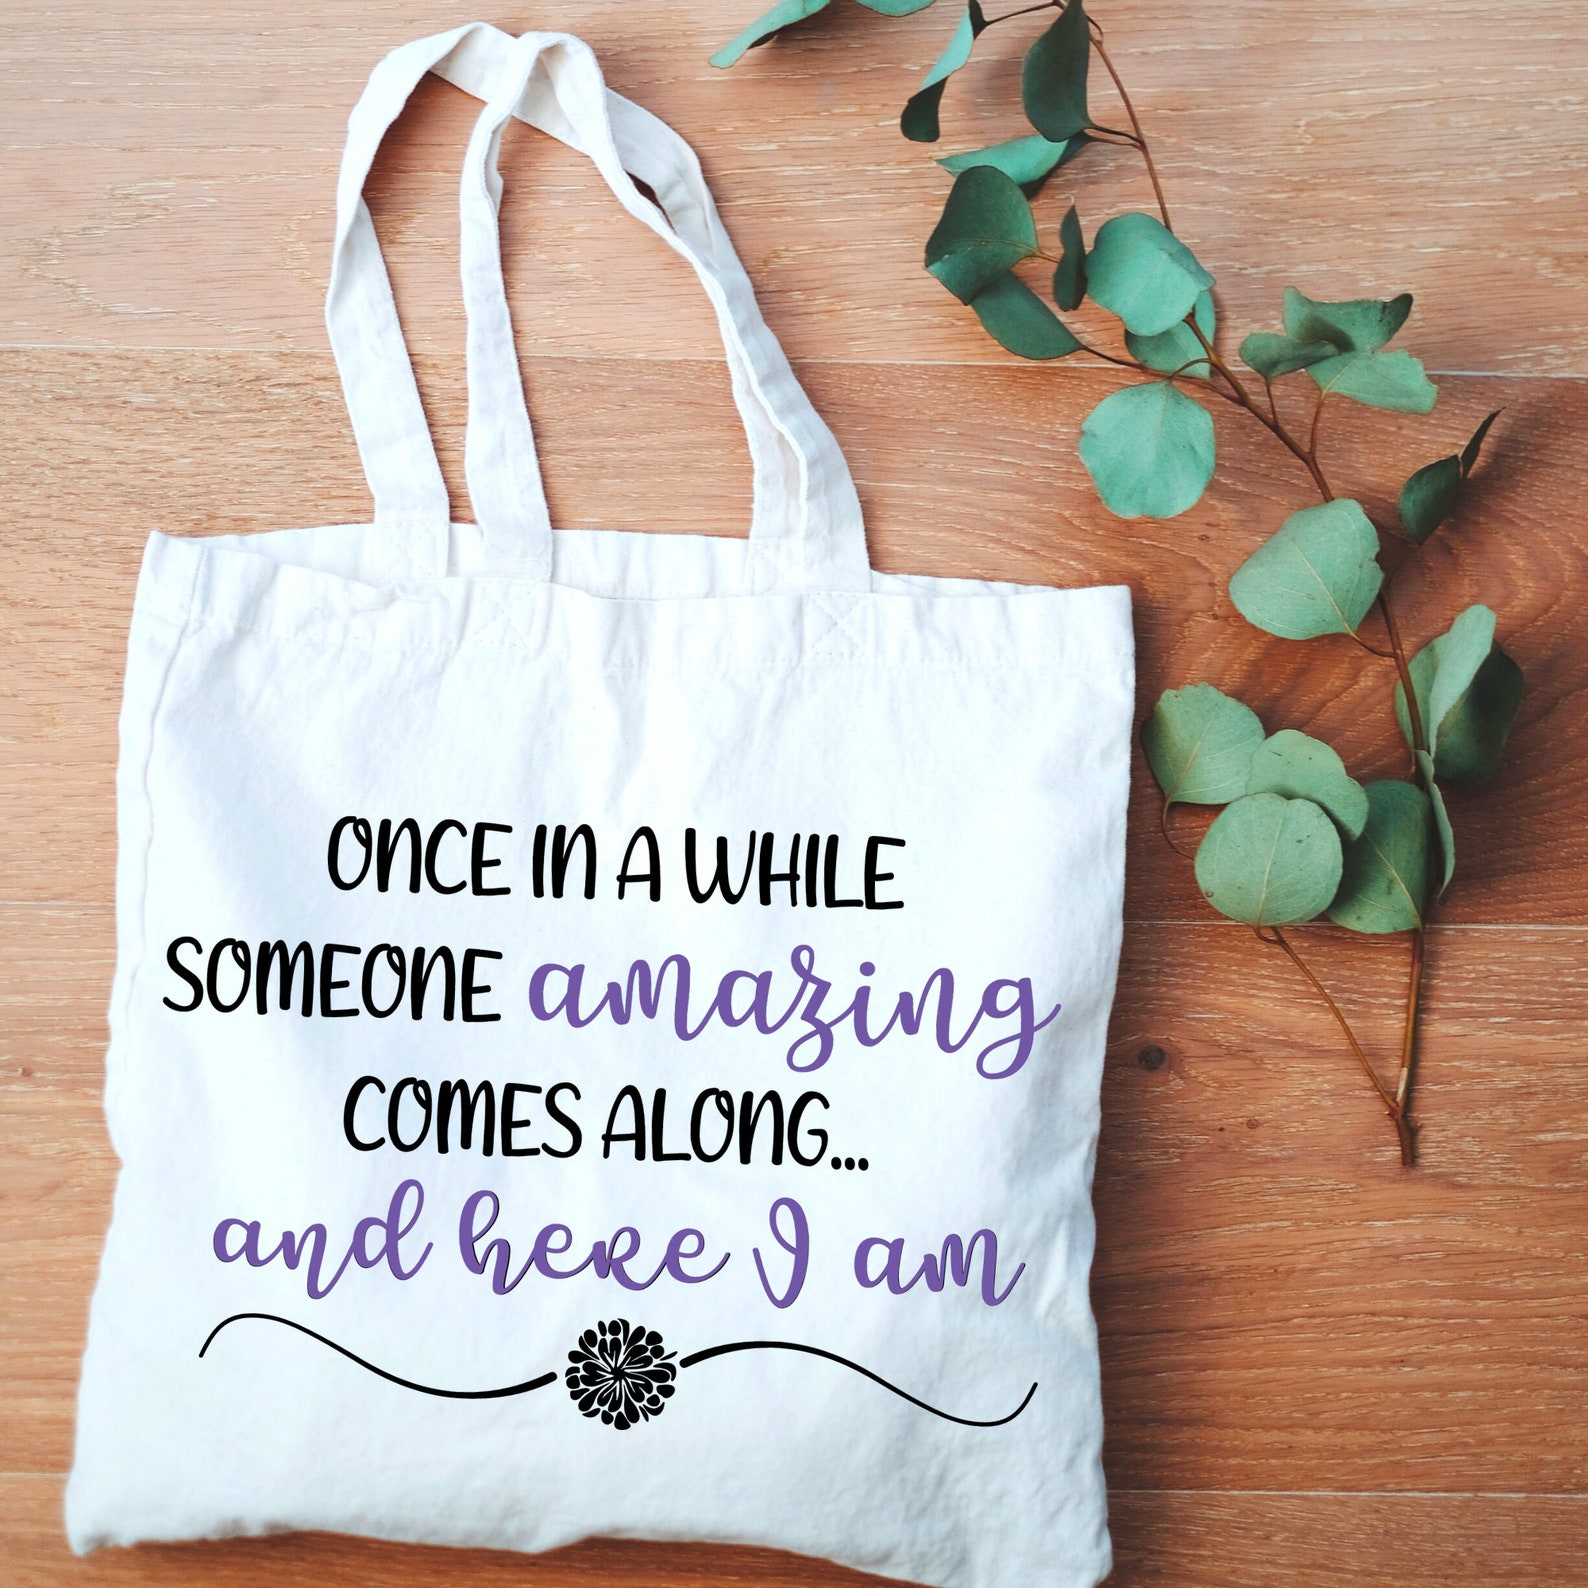 Once in a while someone amazing comes along and here I am SVG | Etsy